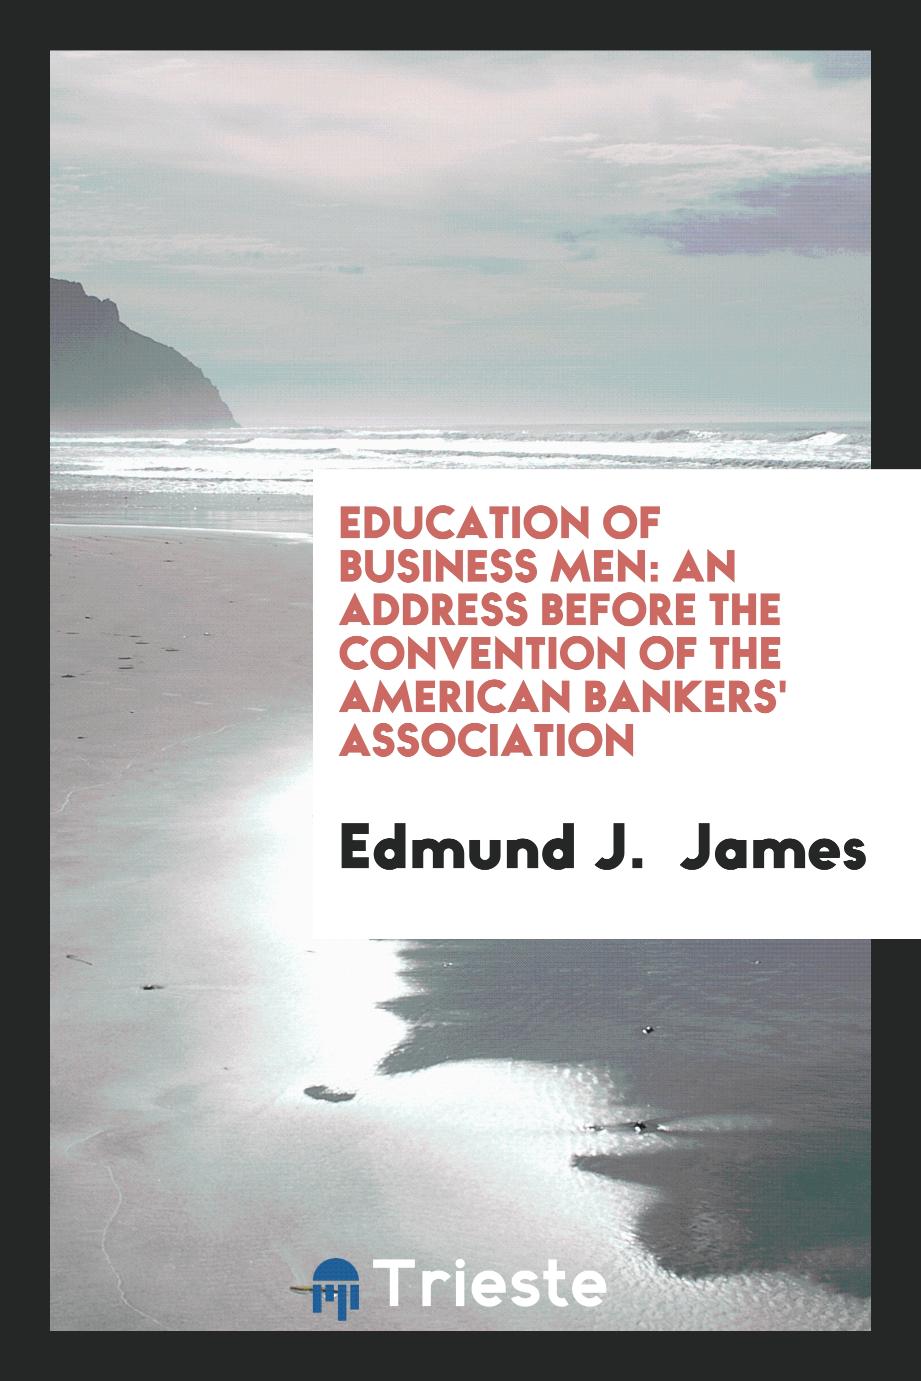 Education of Business Men: An Address Before the Convention of the American Bankers' Association